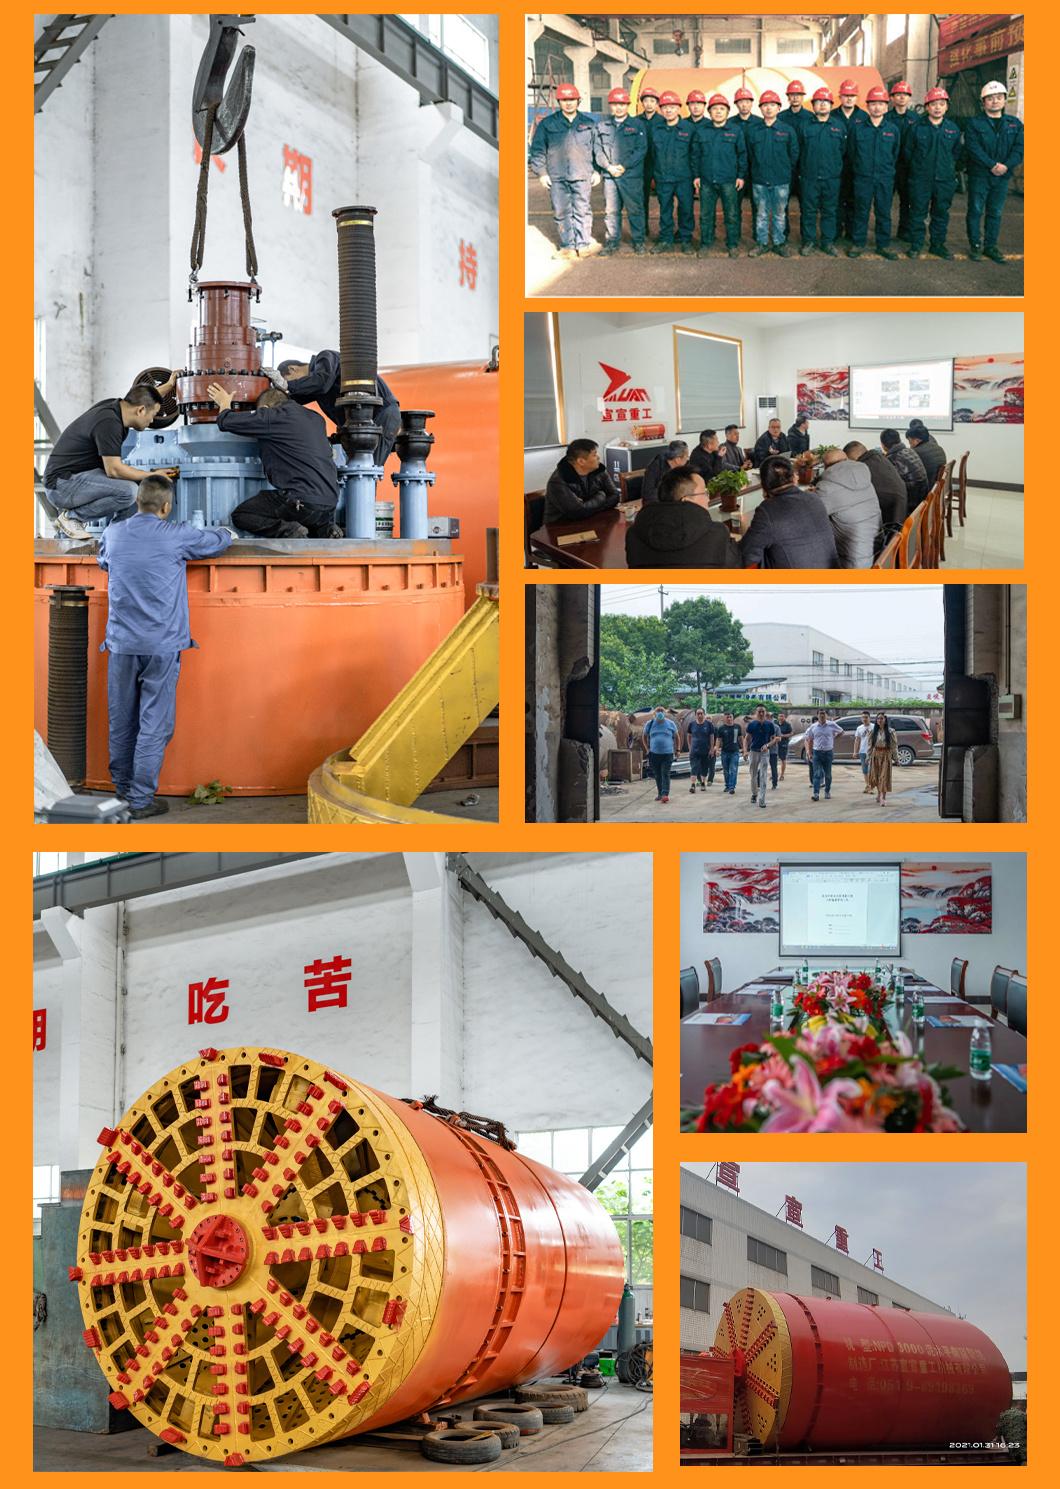 Hot Sale Top Trenchless Project Ysd3000 Rock Pipe Jacking Machine for Rcc